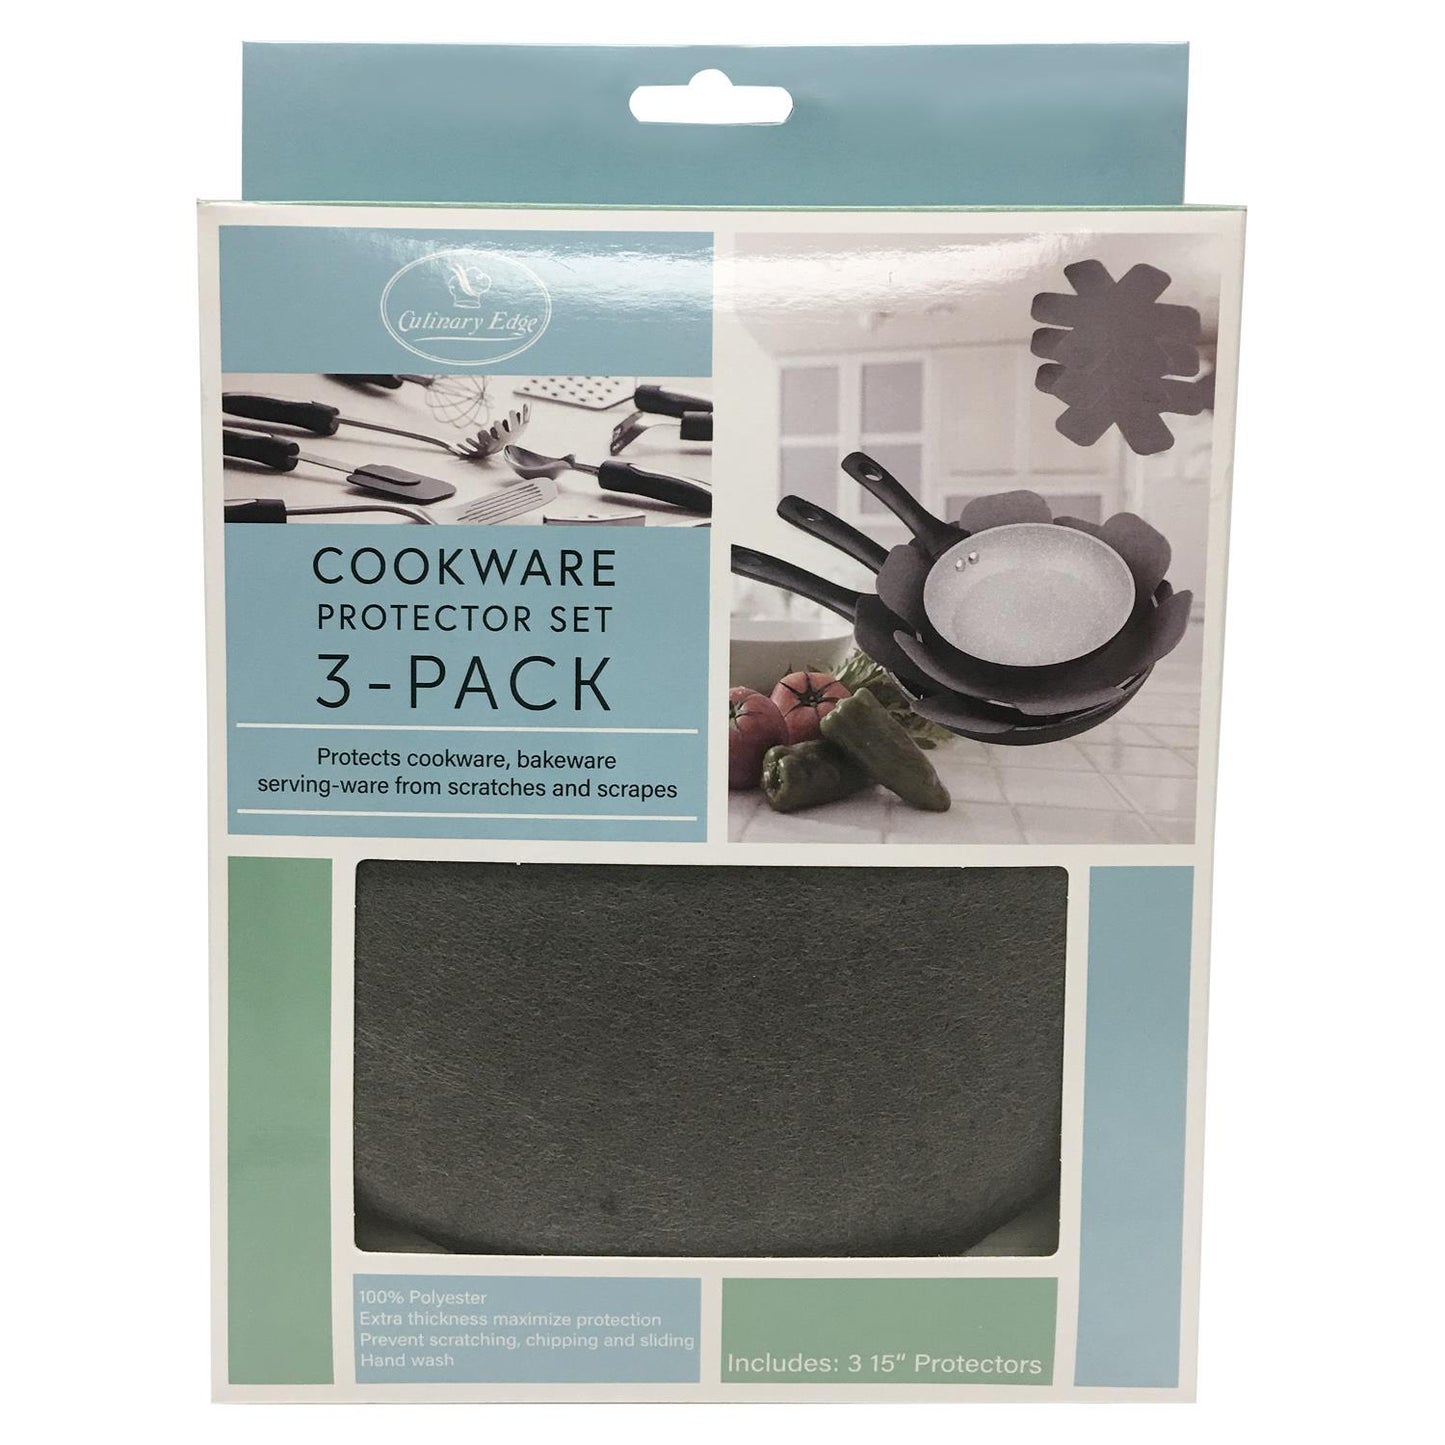 COOKWARE PROTECTOR